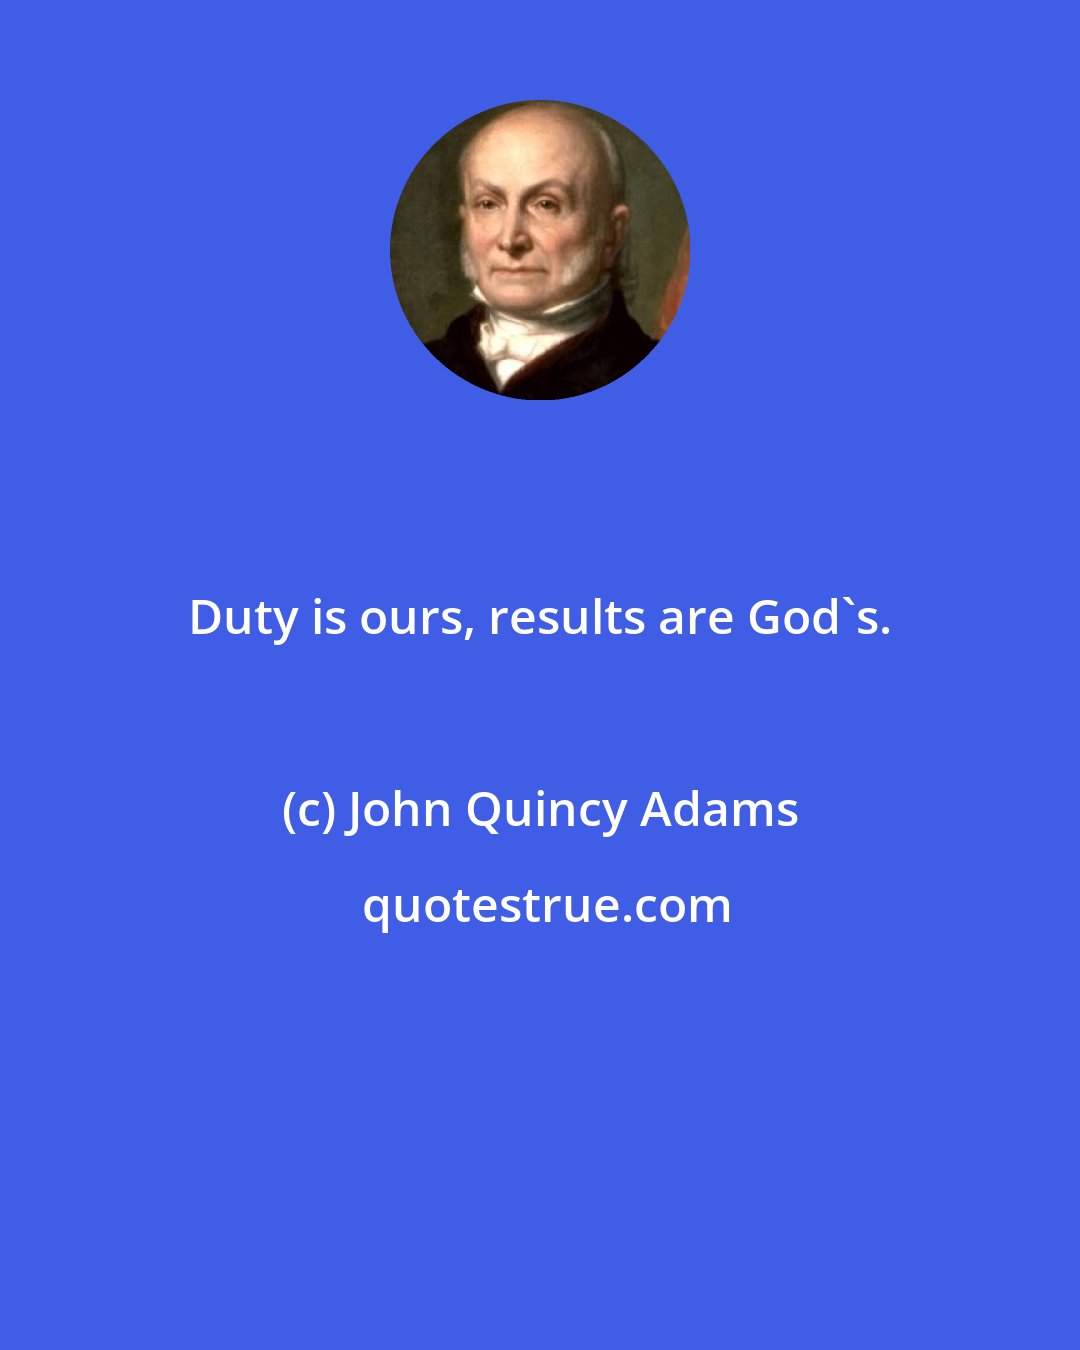 John Quincy Adams: Duty is ours, results are God's.